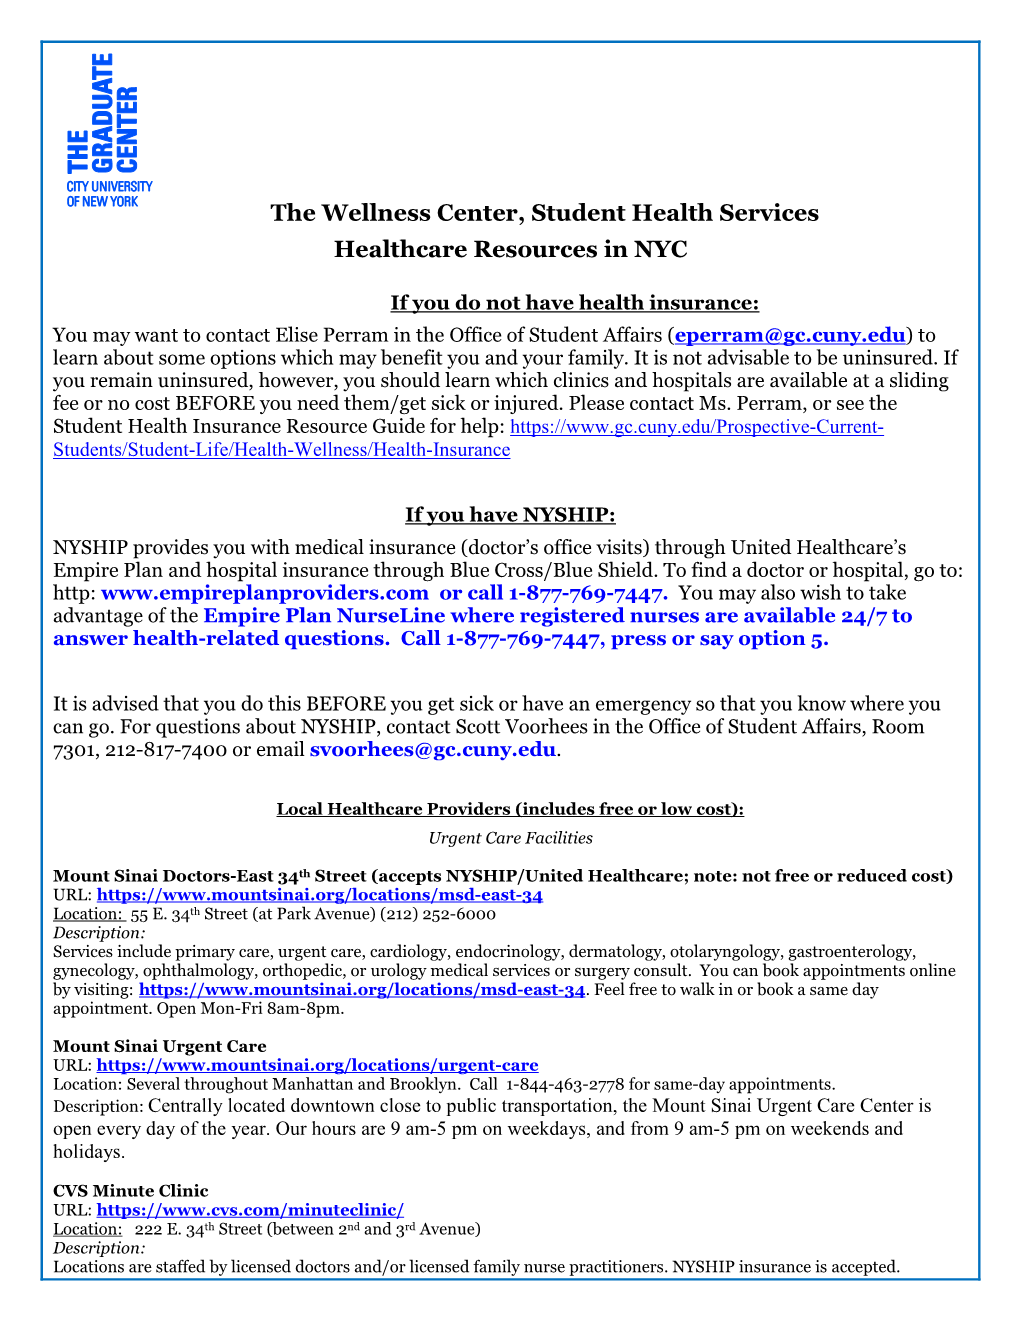 The Wellness Center, Student Health Services Healthcare Resources in NYC